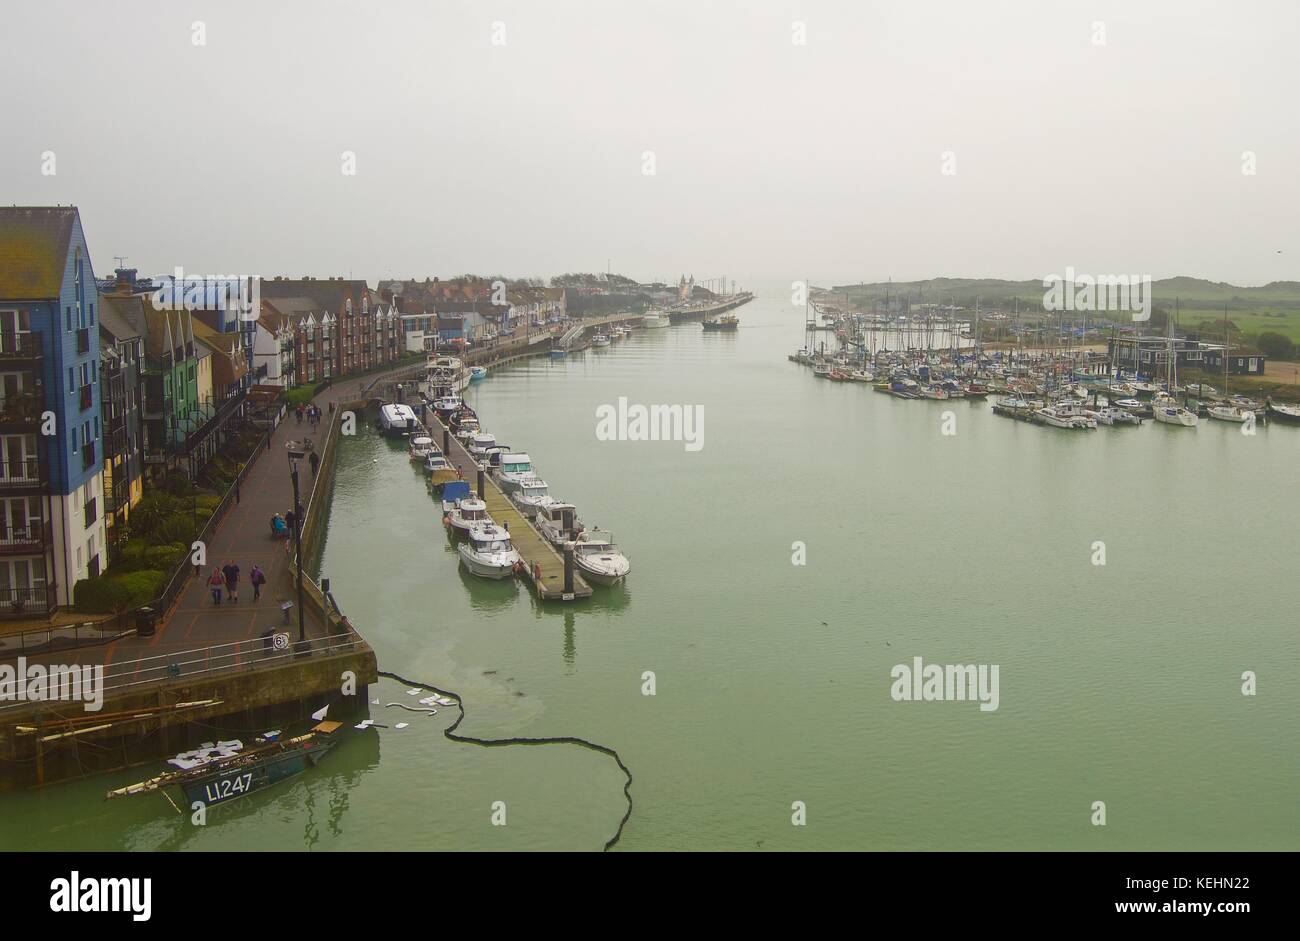 View of Littlehampton harbour and River Arun from Look and Sea tower, Littlehampton, UK Stock Photo